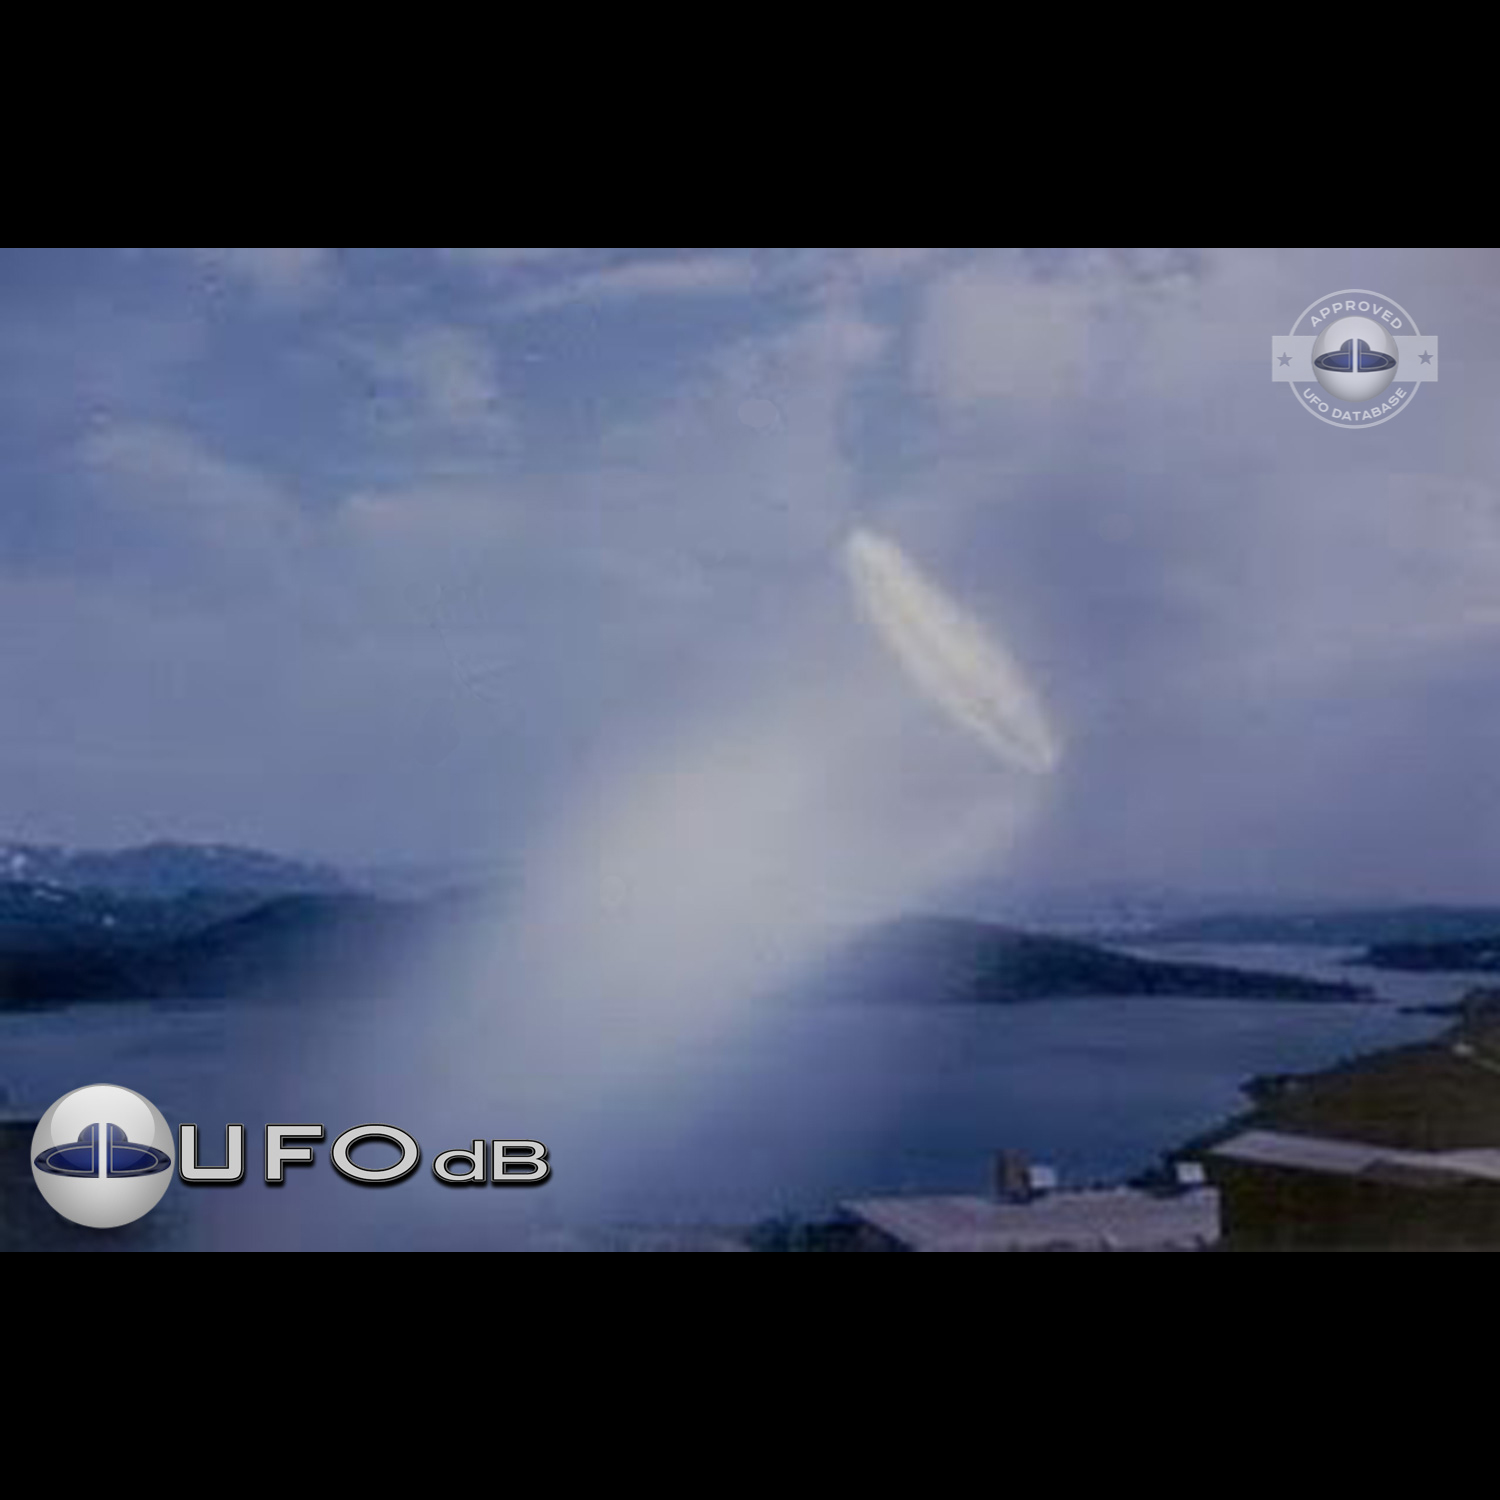 UFO almost sideways over buildings leaving a white gaseous trail 1957 UFO Picture #124-1